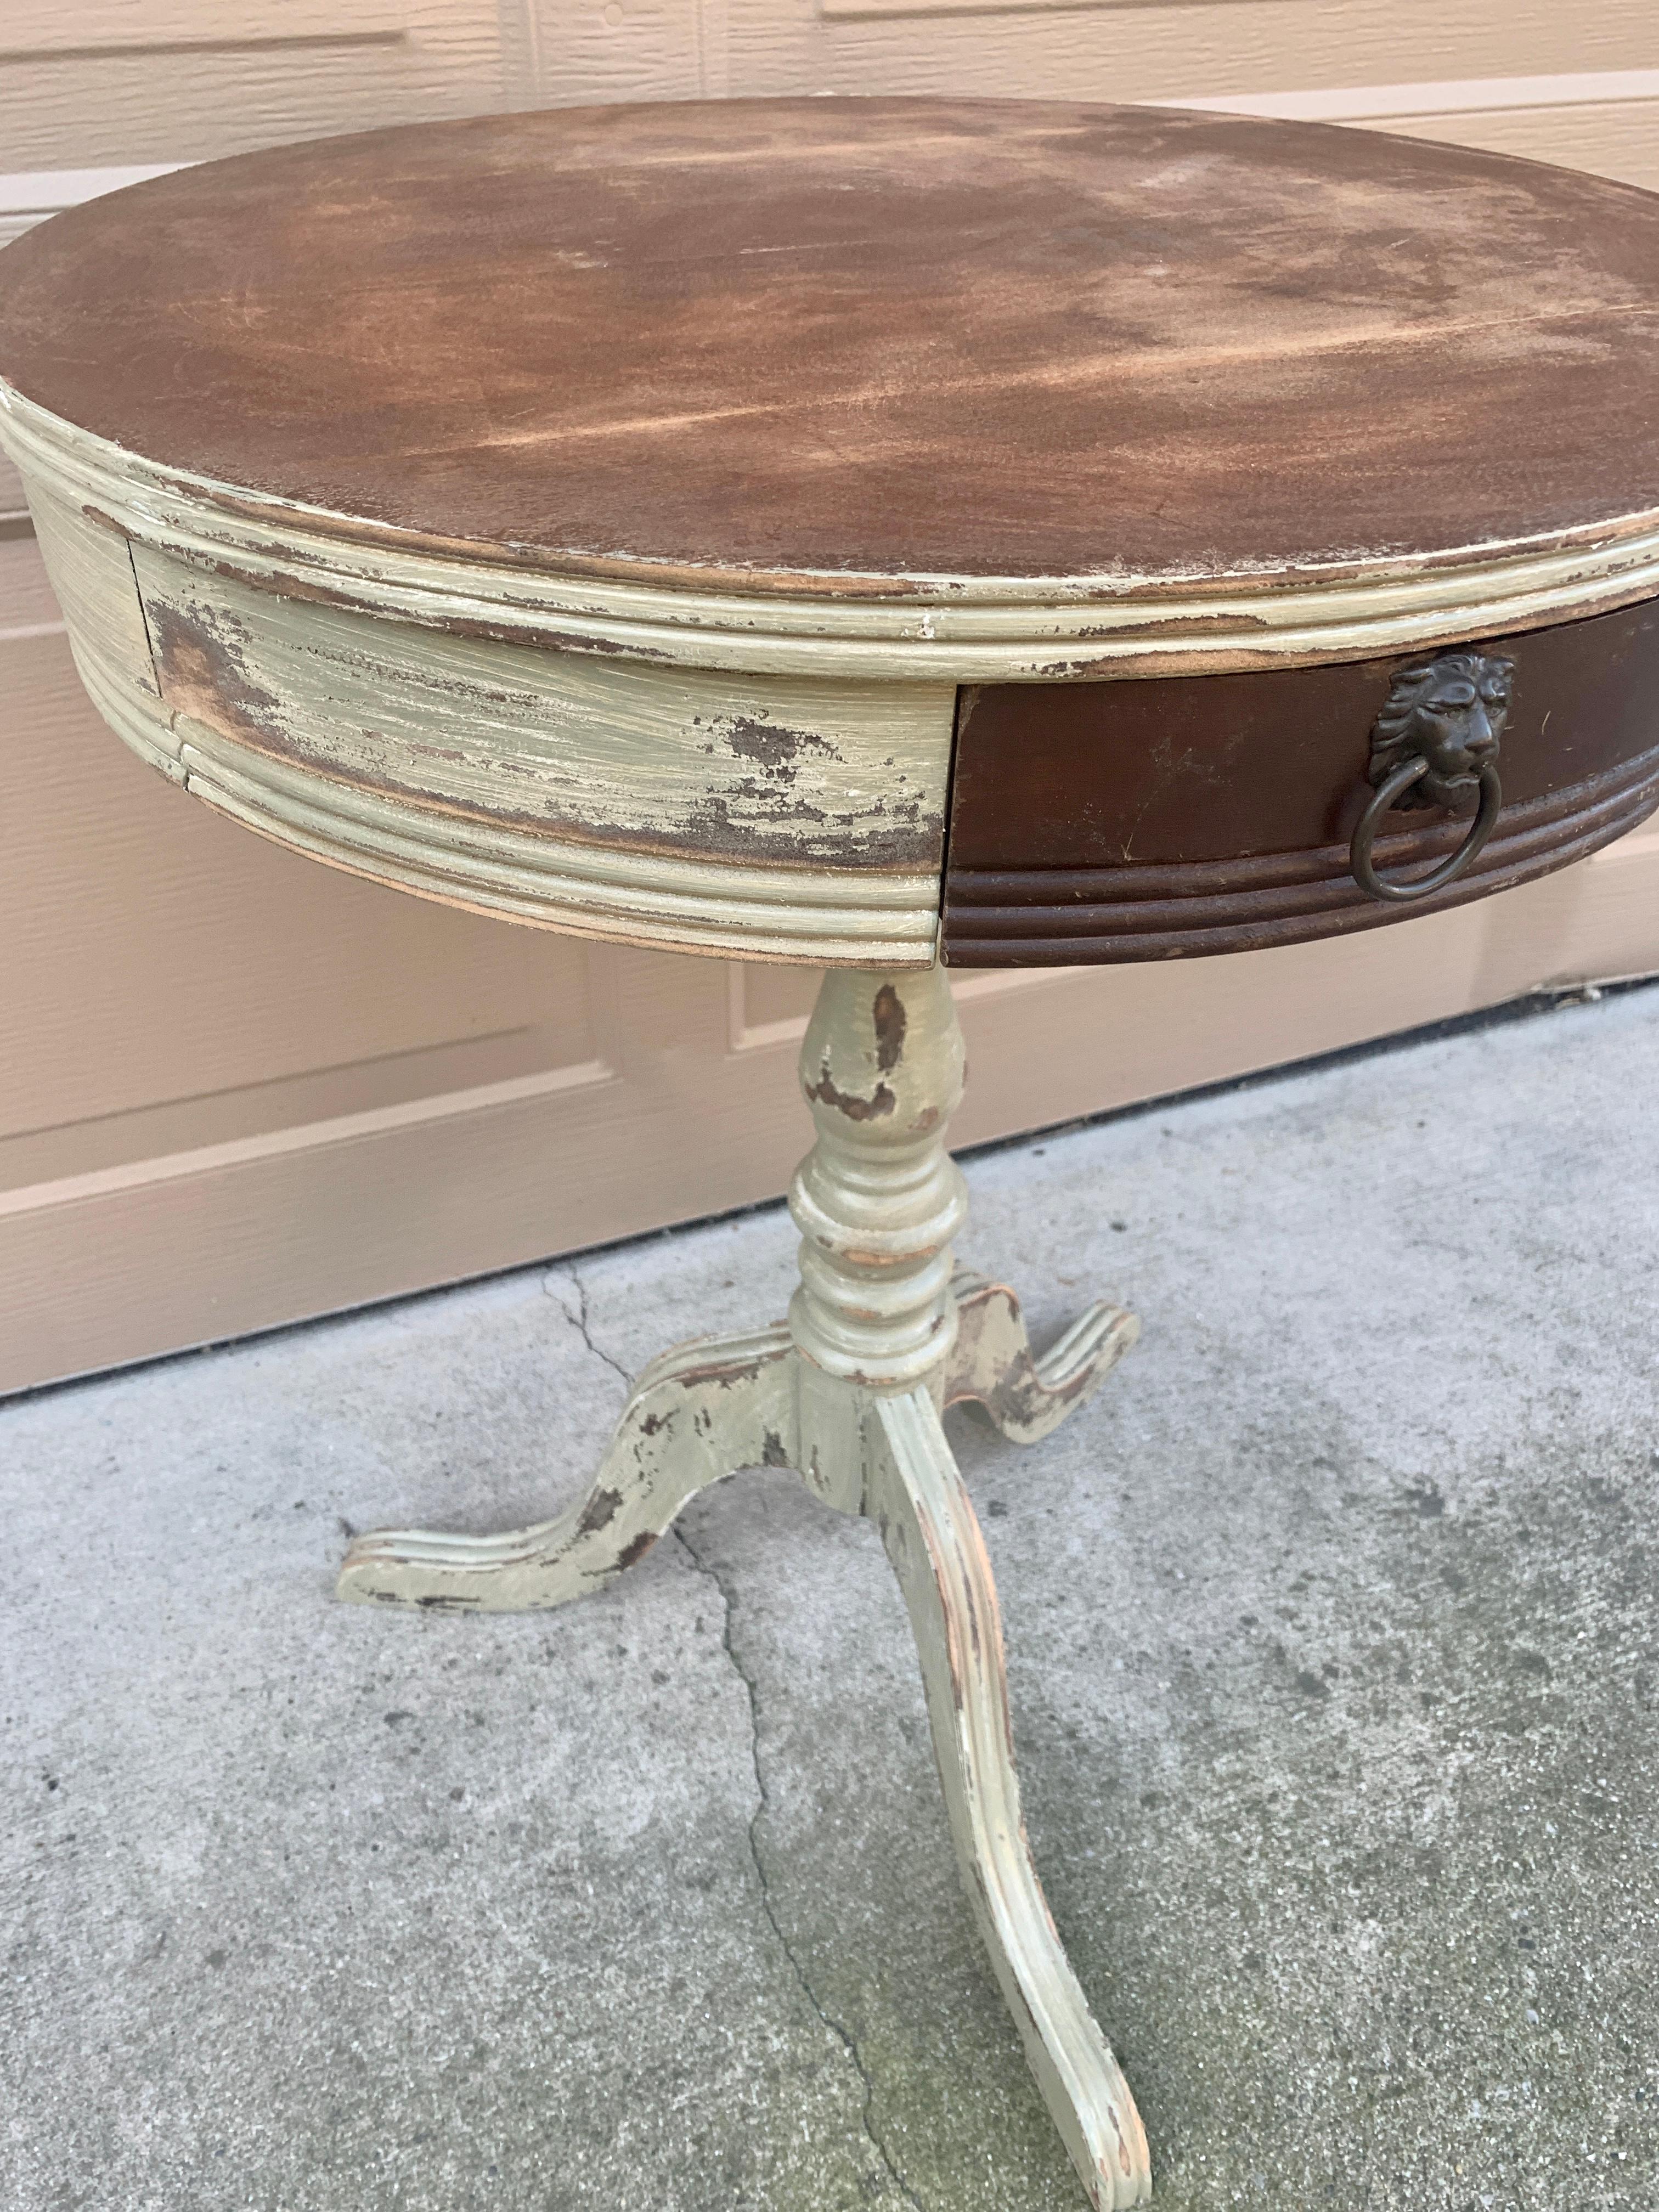 Antique American Regency Round Painted Walnut Side Table, Late 19th Century For Sale 7